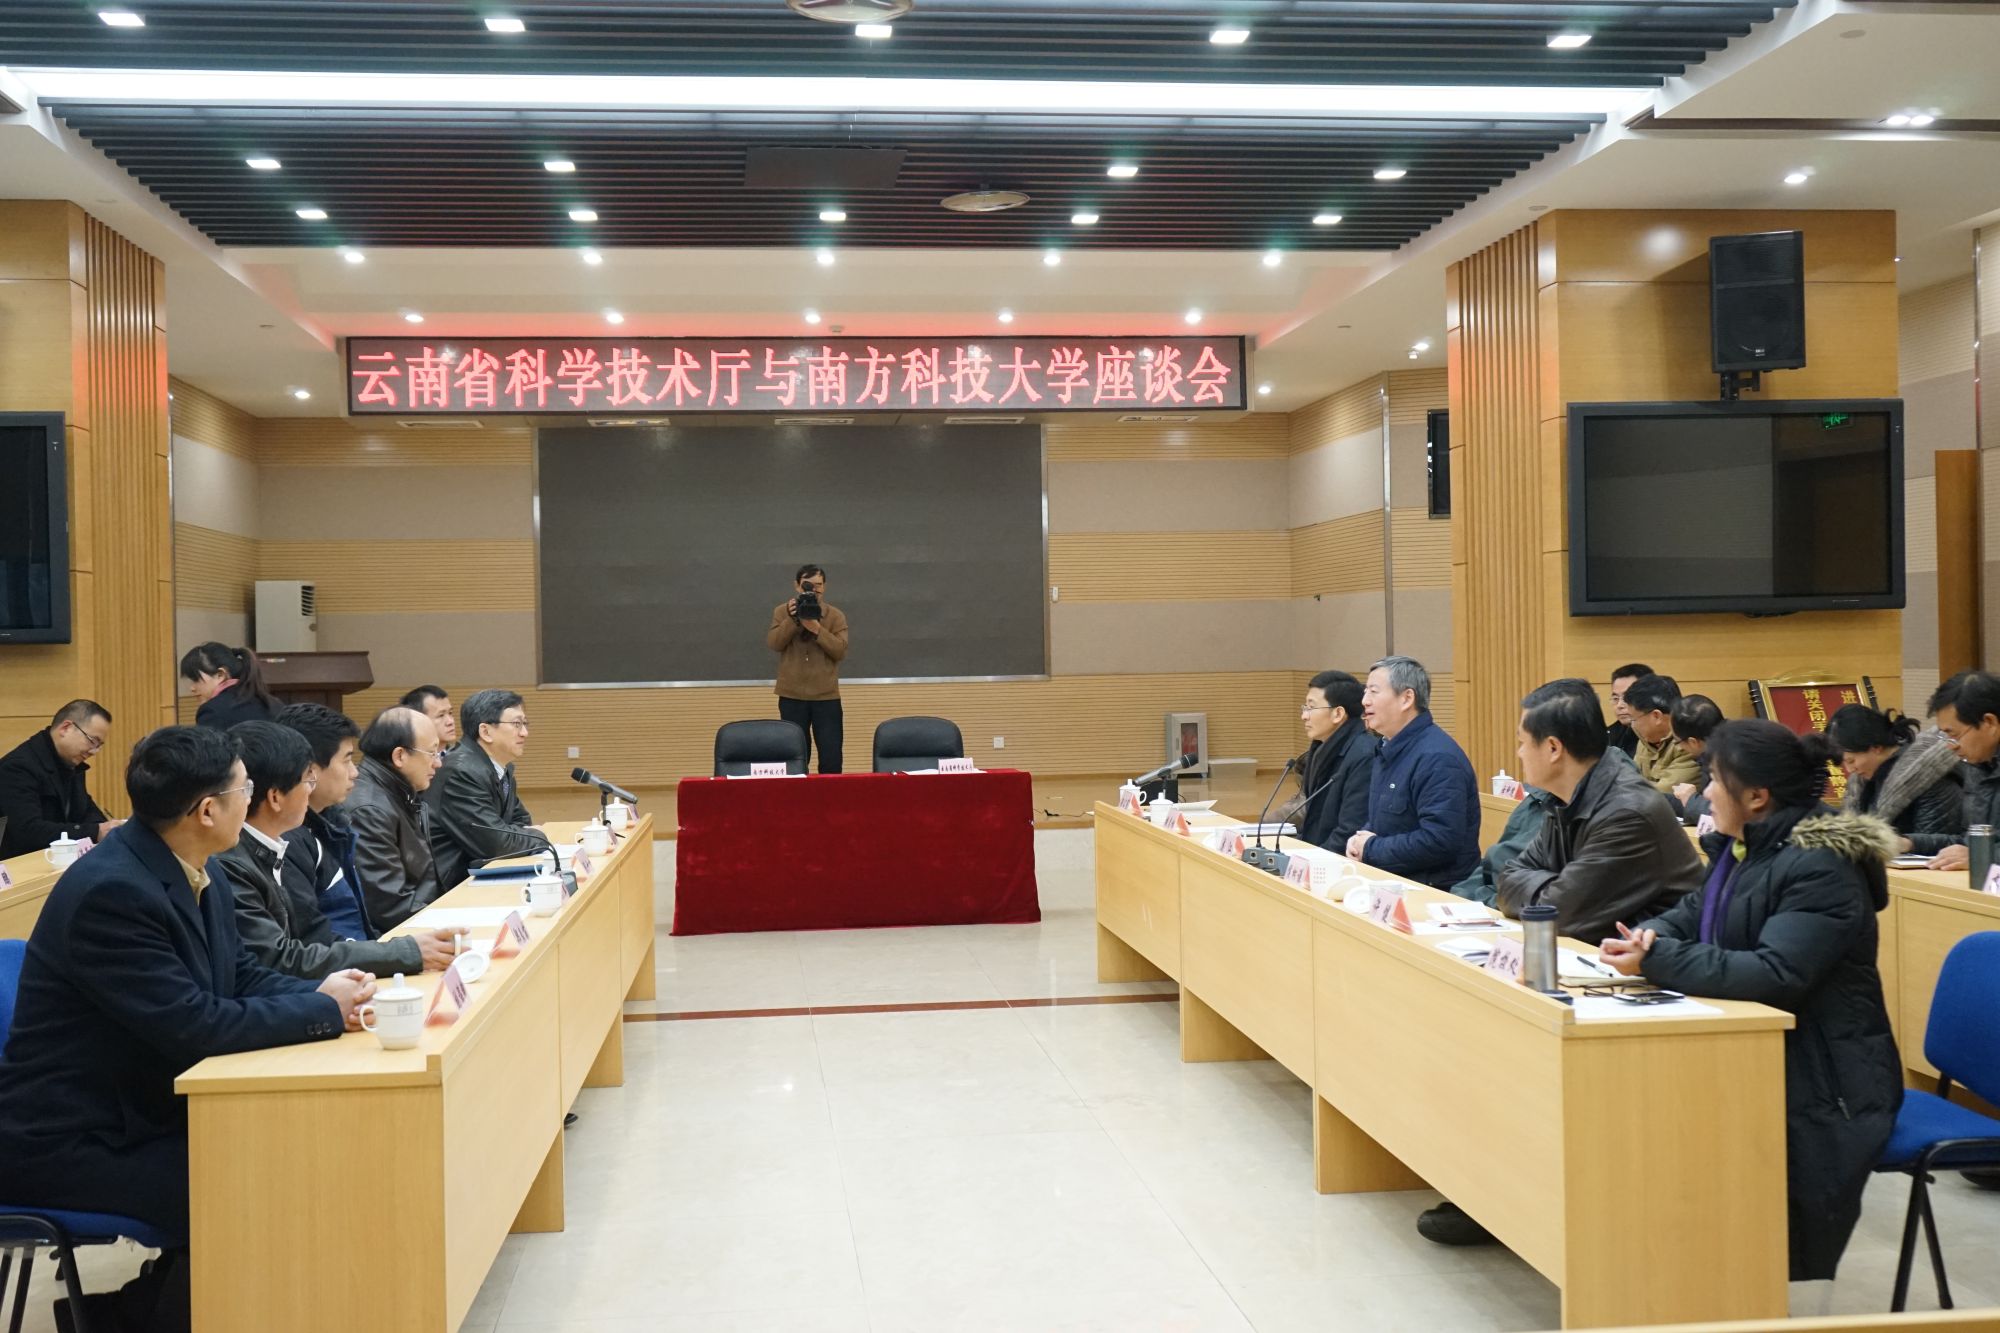 SUSTC Signs Agreement in Yunnan with Yunnan Department of Science and Technology about Sci-tech Strategic Framework Agreement